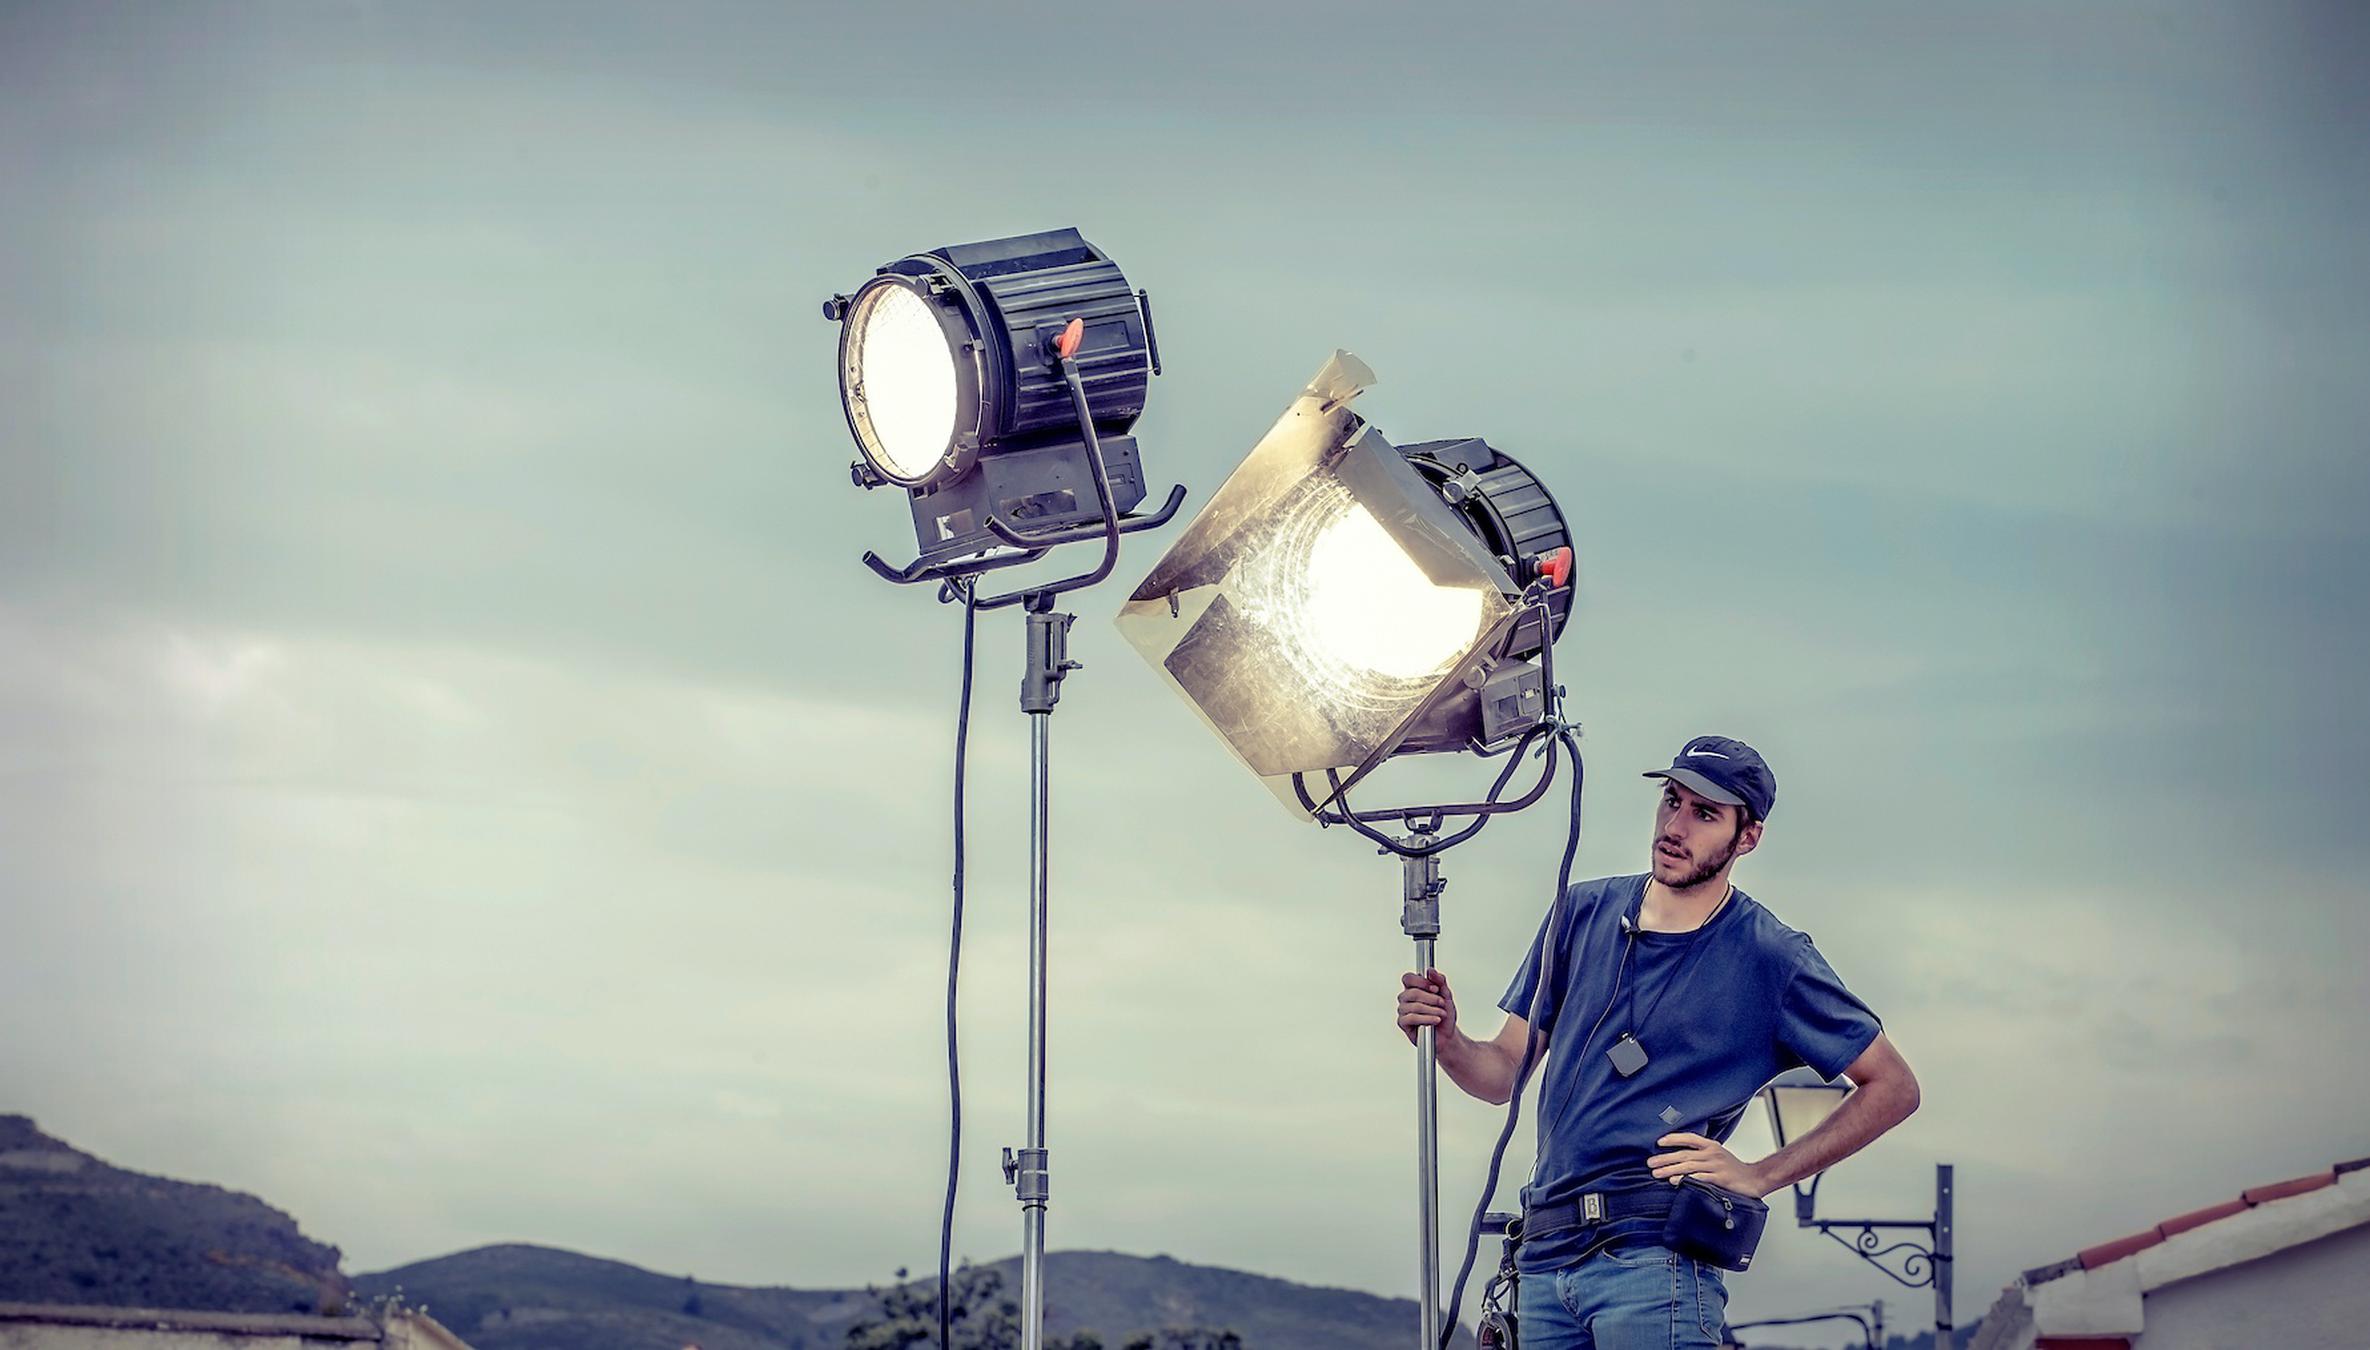 What is a Gaffer? - Gaffer Roles, Responsibilities, and Skills on Set